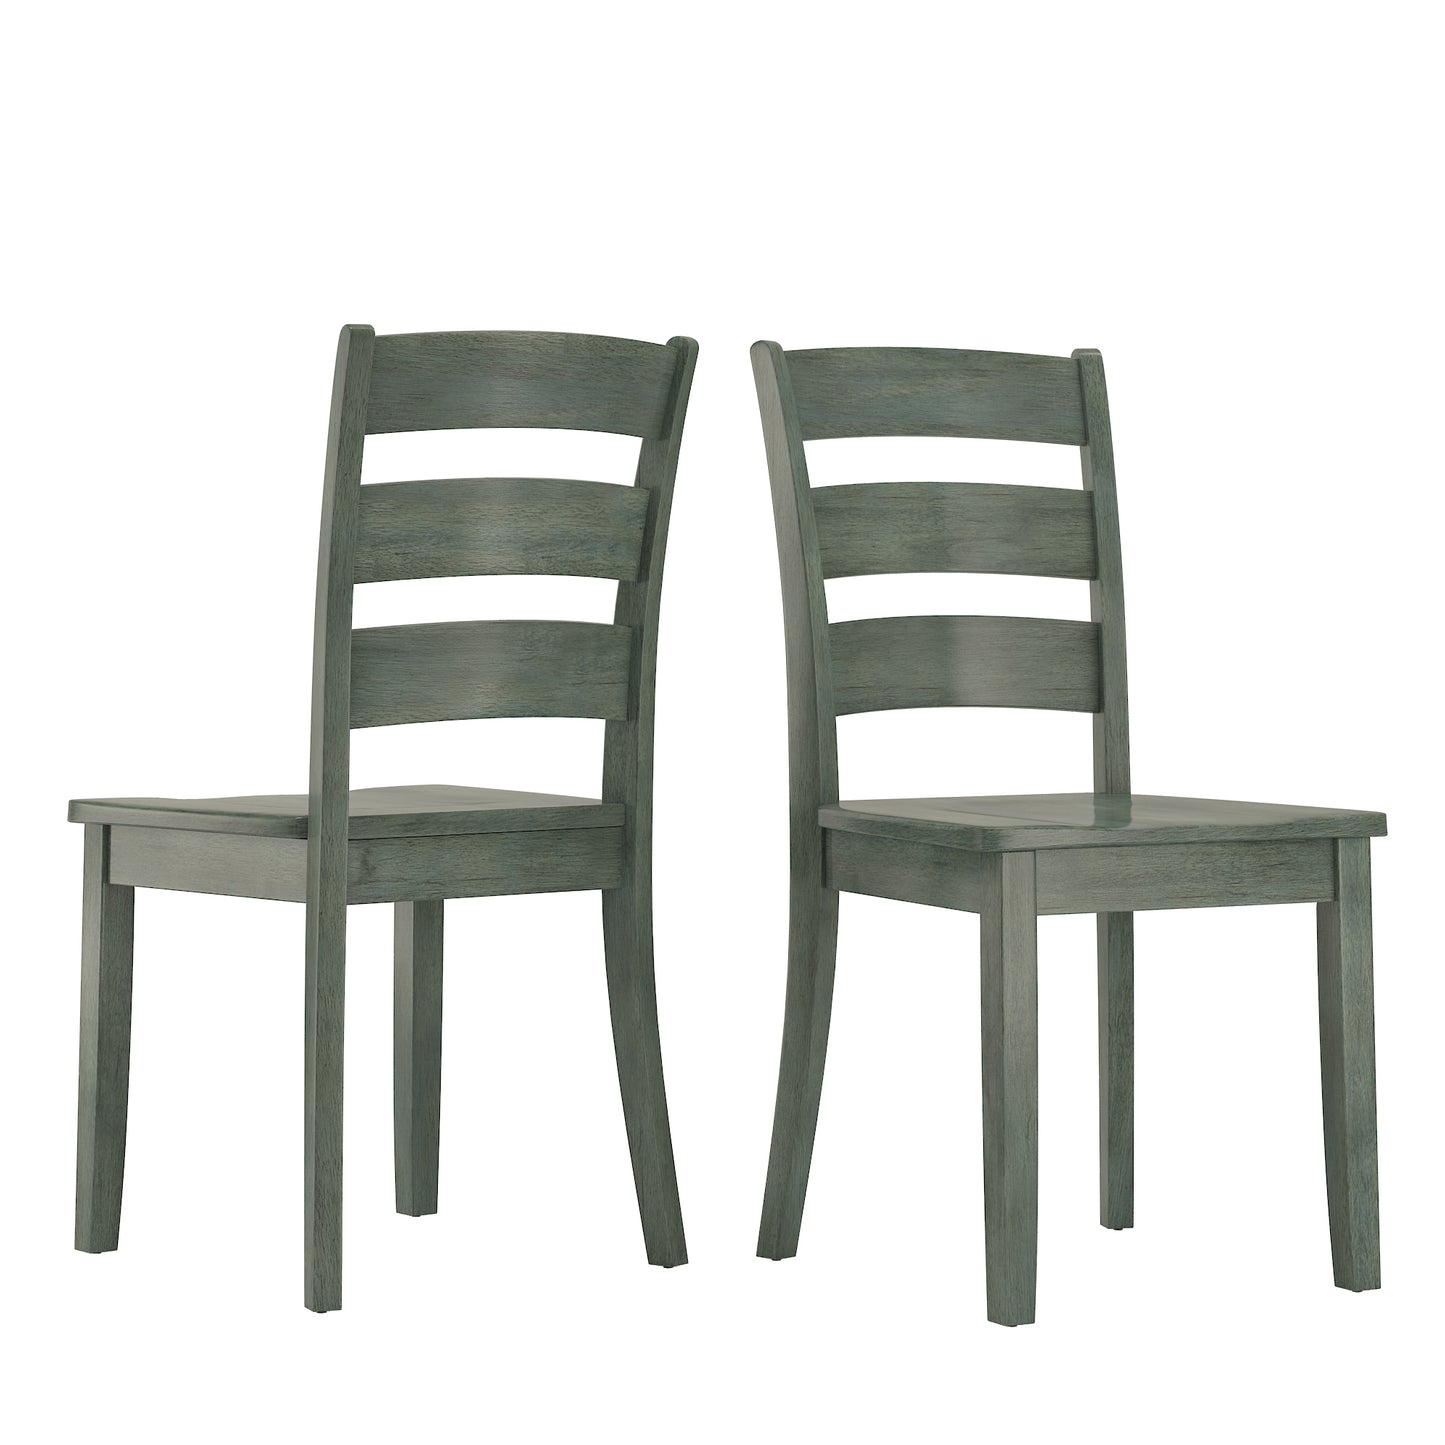 Ladder Back Wood Dining Chairs (Set of 2) - Antique Sage Finish